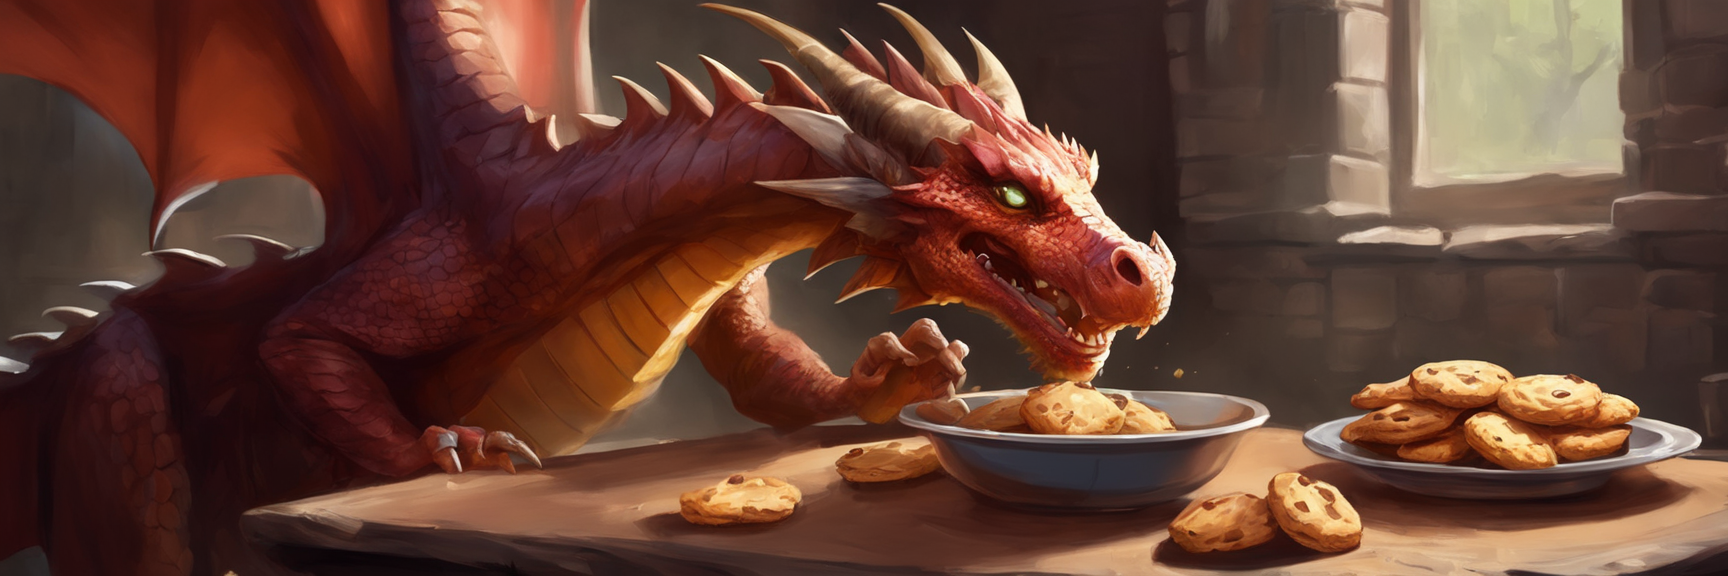 A Red Dragon eating some Cookies